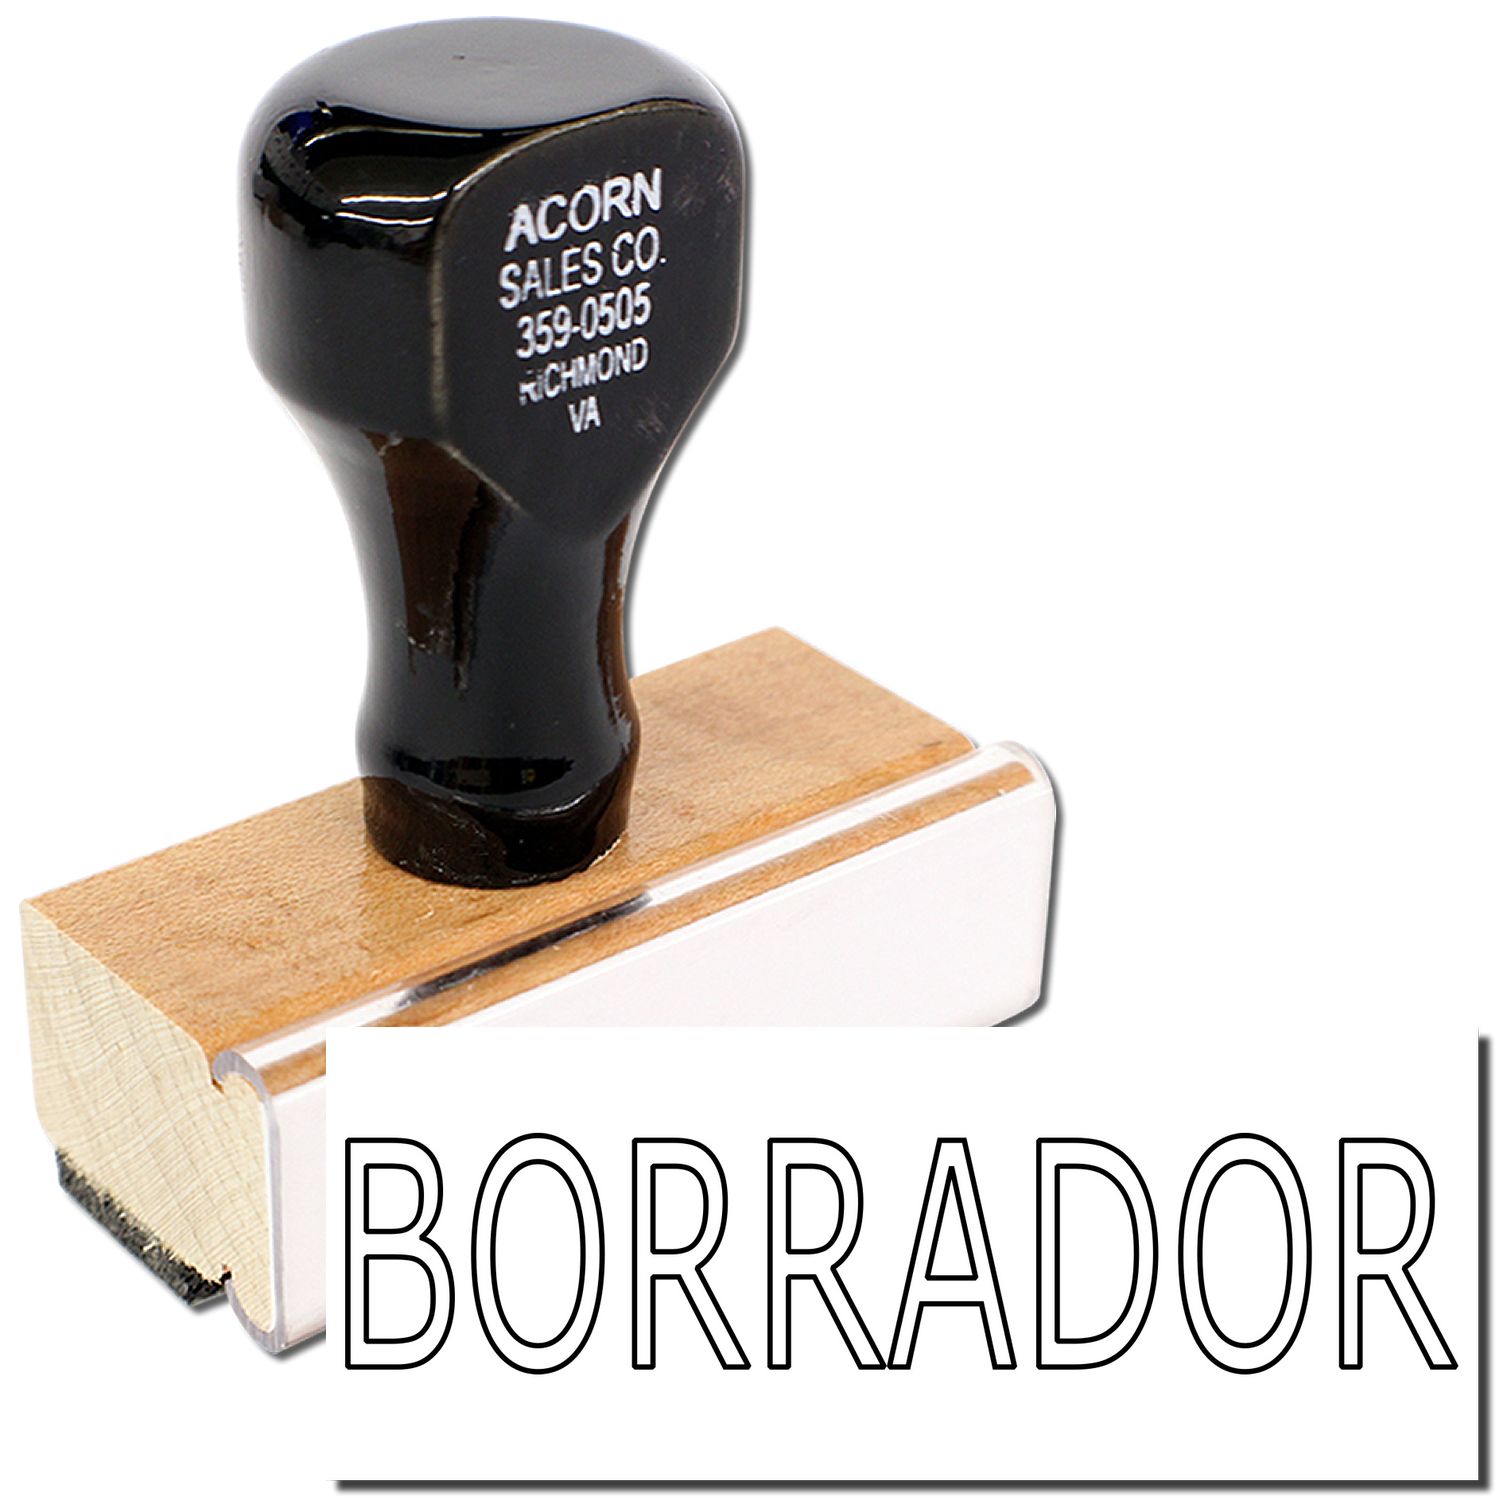 Large Borrador Rubber Stamp, Wooden Handle Rubber Stamp, Laser Engraved Dies, Impression Size 7/8" tall x 2-1/4”, Uses a Separate Stamp Pad - image 1 of 1